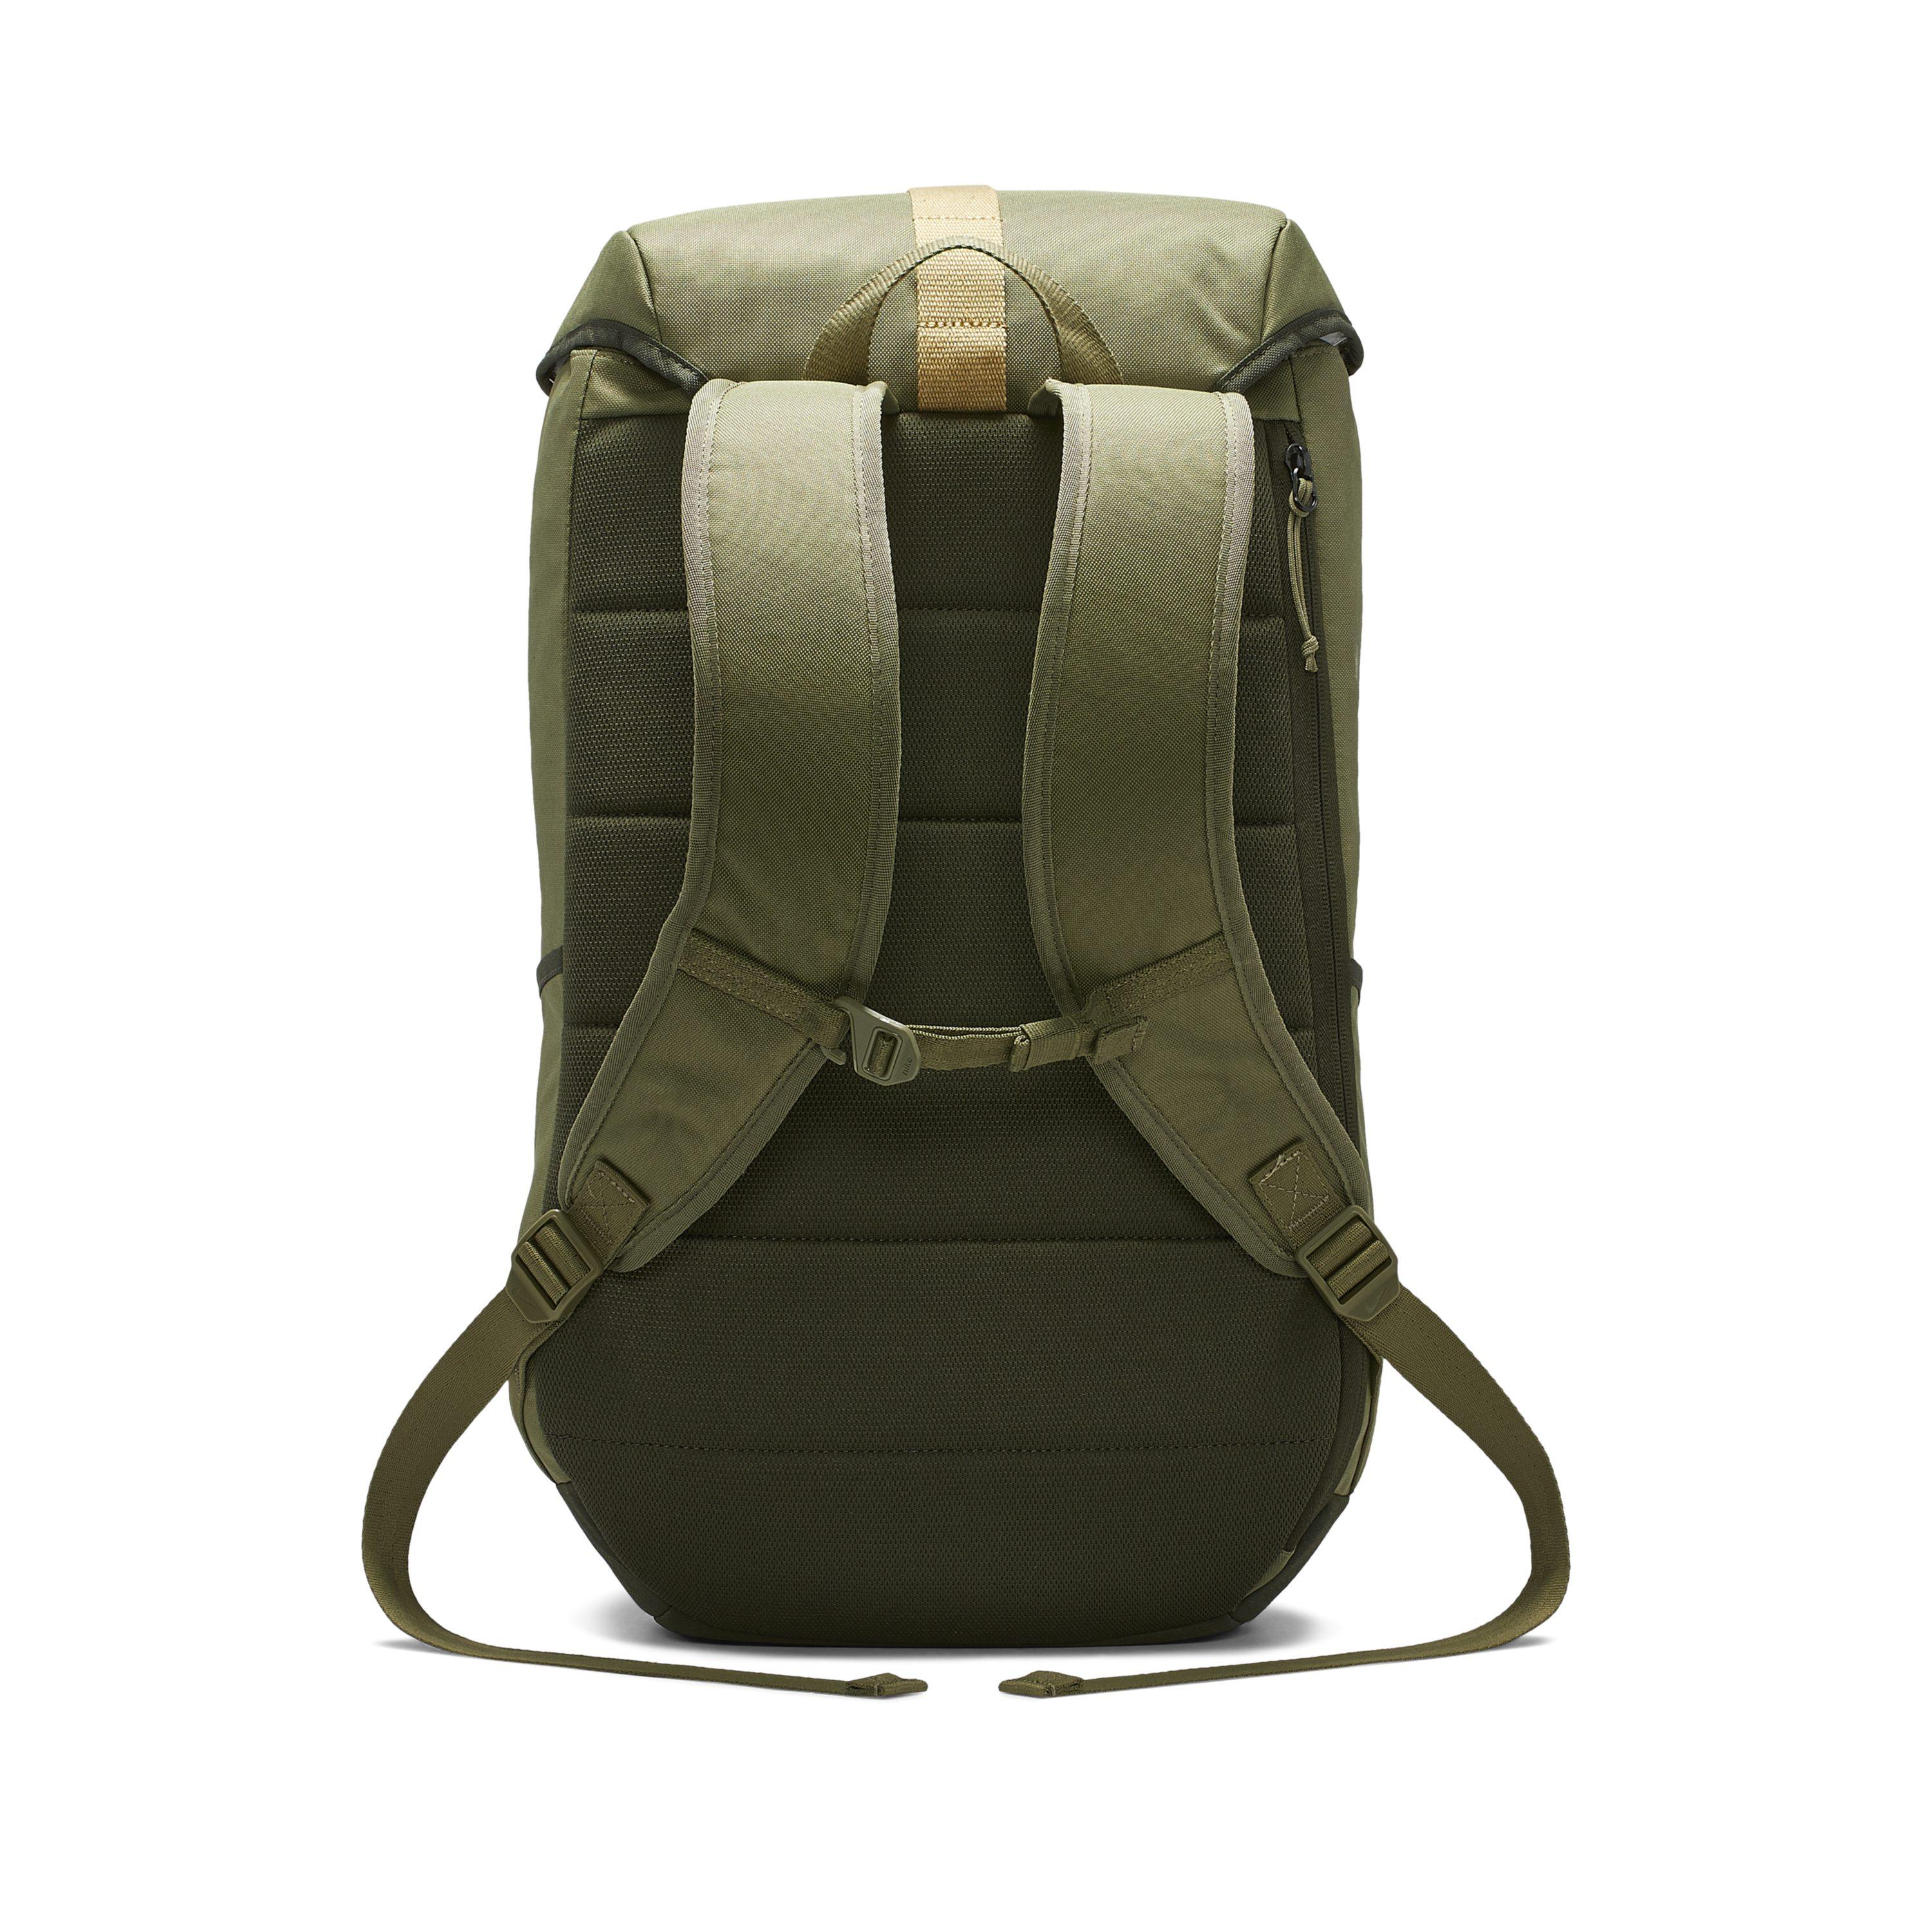 Nike Explore Printed Backpack in Olive (Green) for Men - Lyst